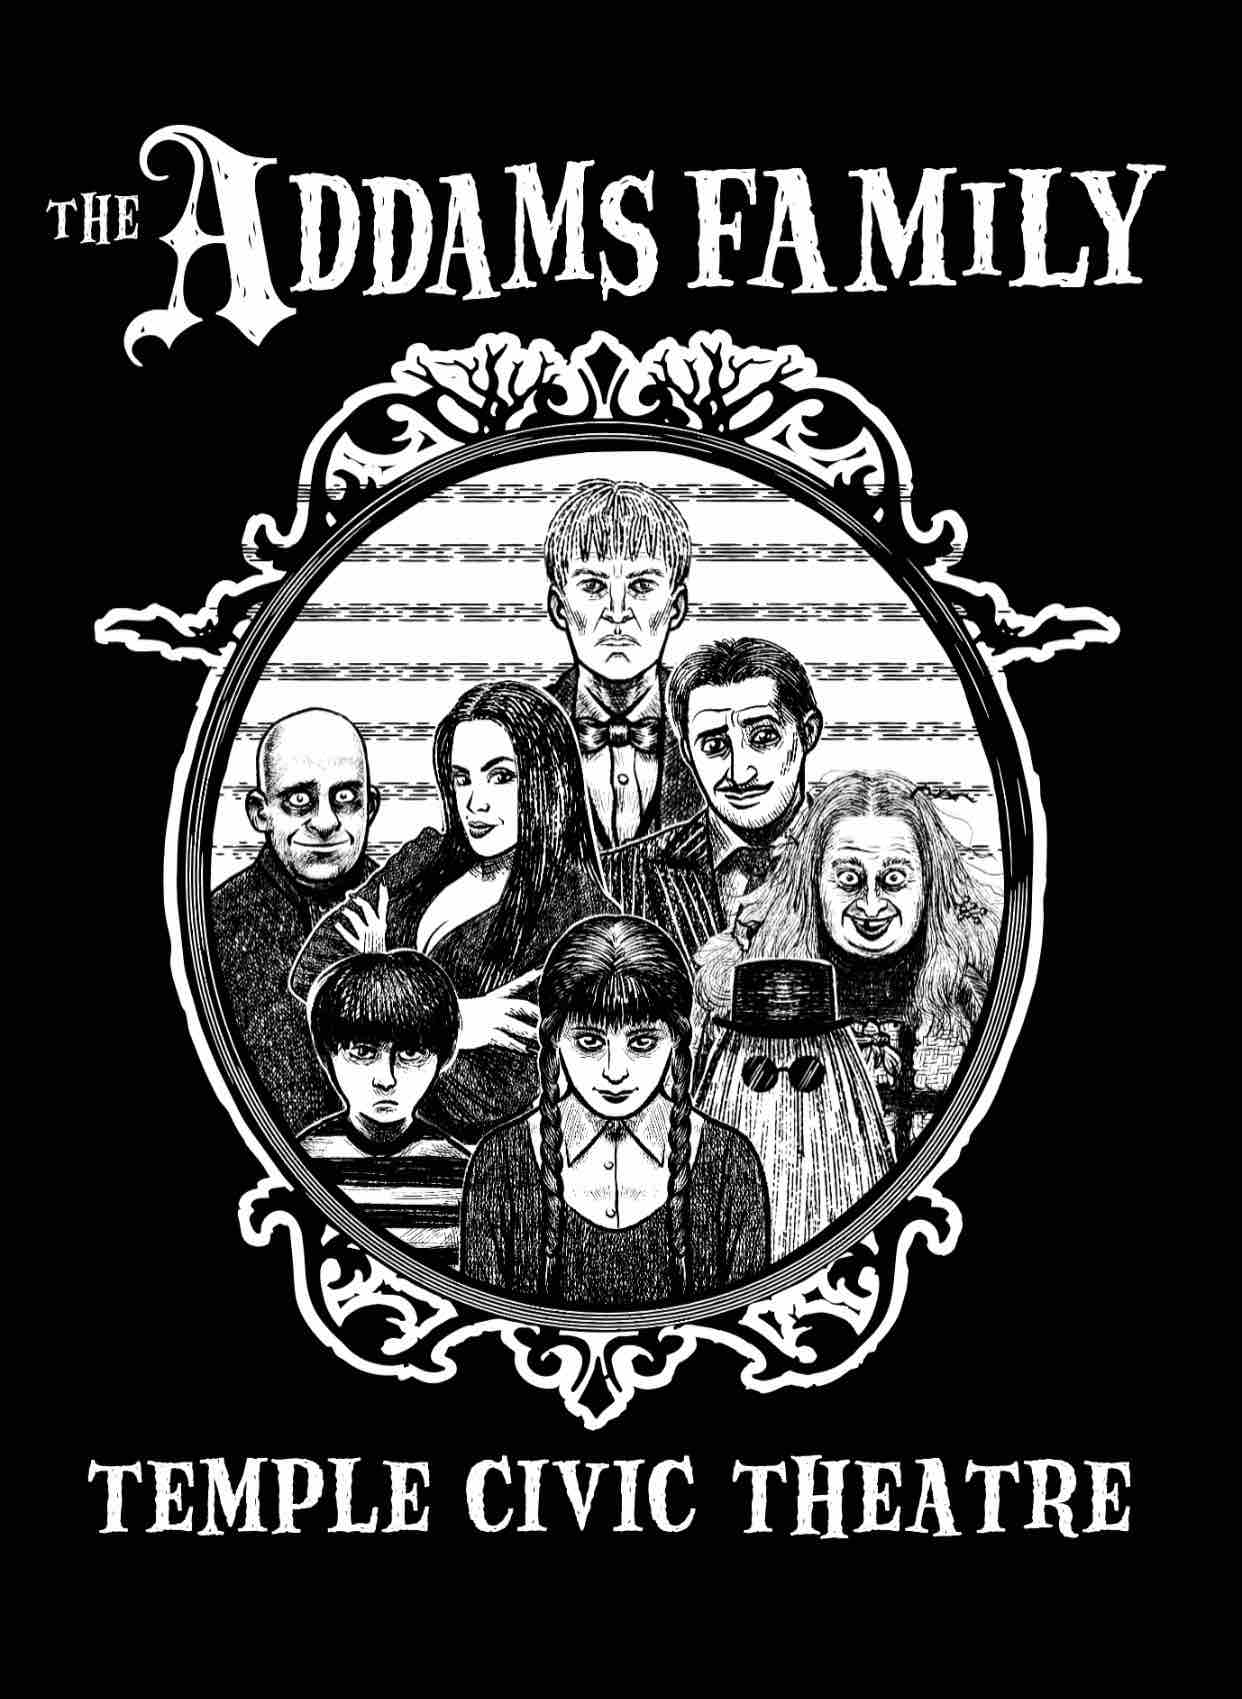 The Addams Family by Temple Civic Theatre